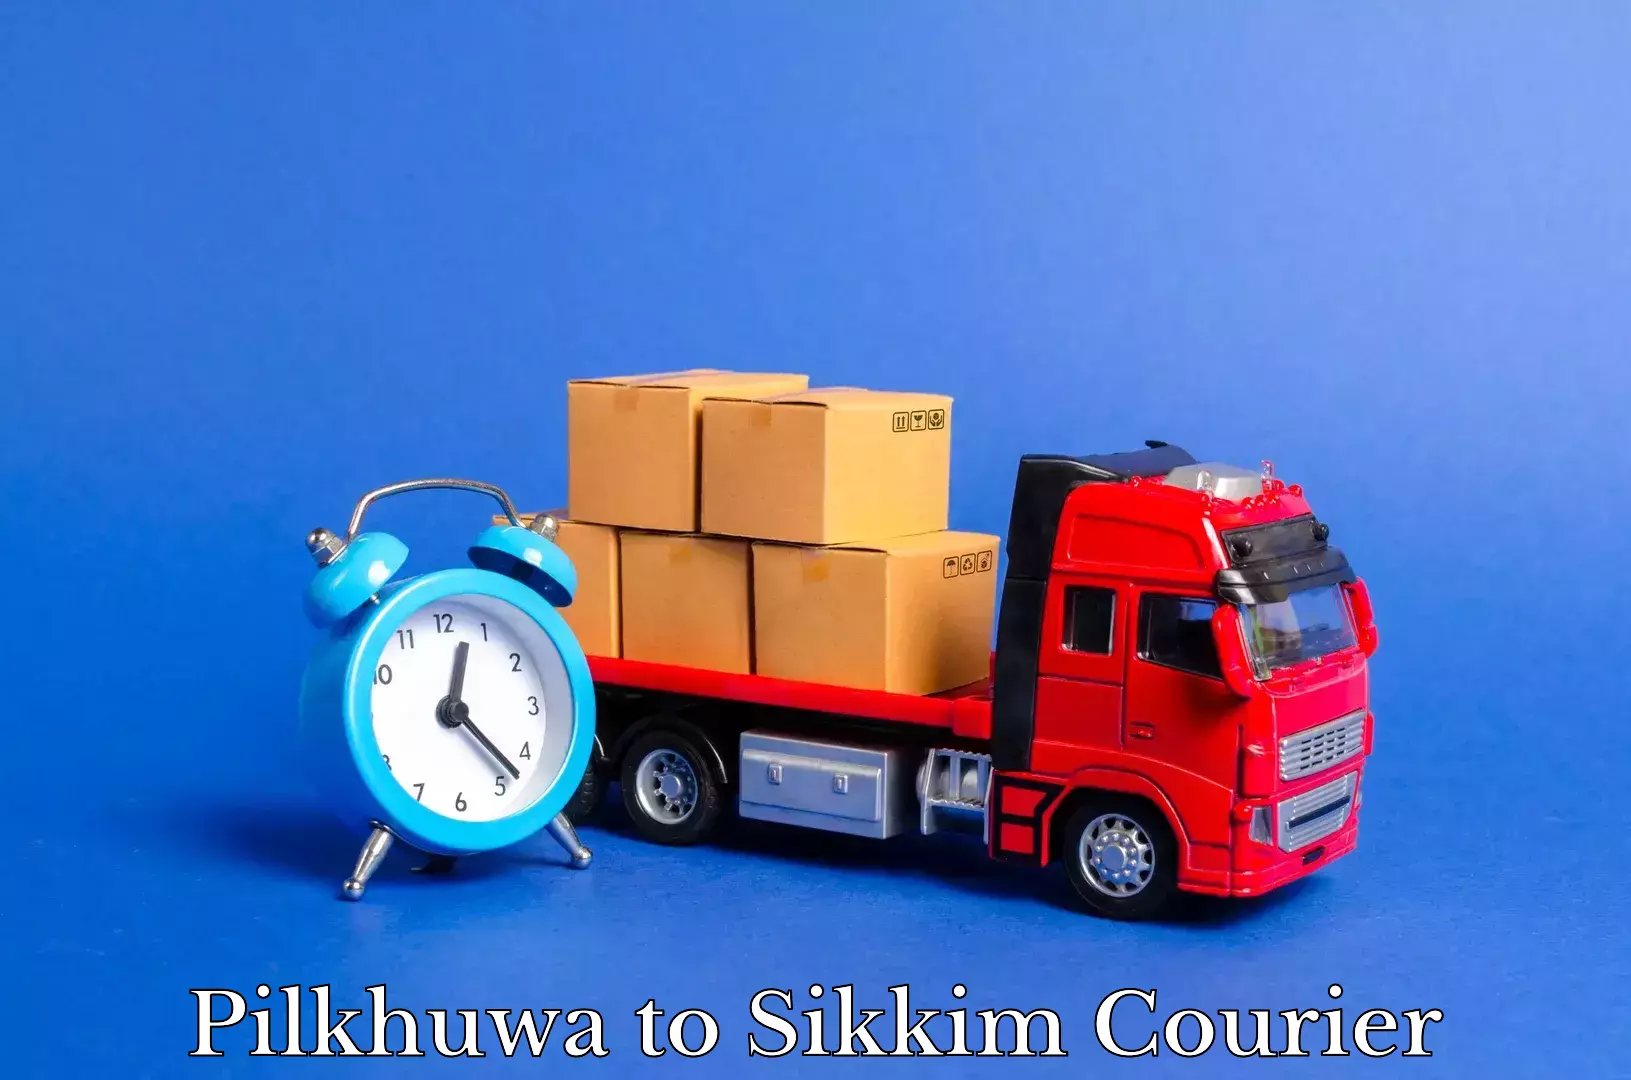 Quality relocation assistance in Pilkhuwa to Mangan